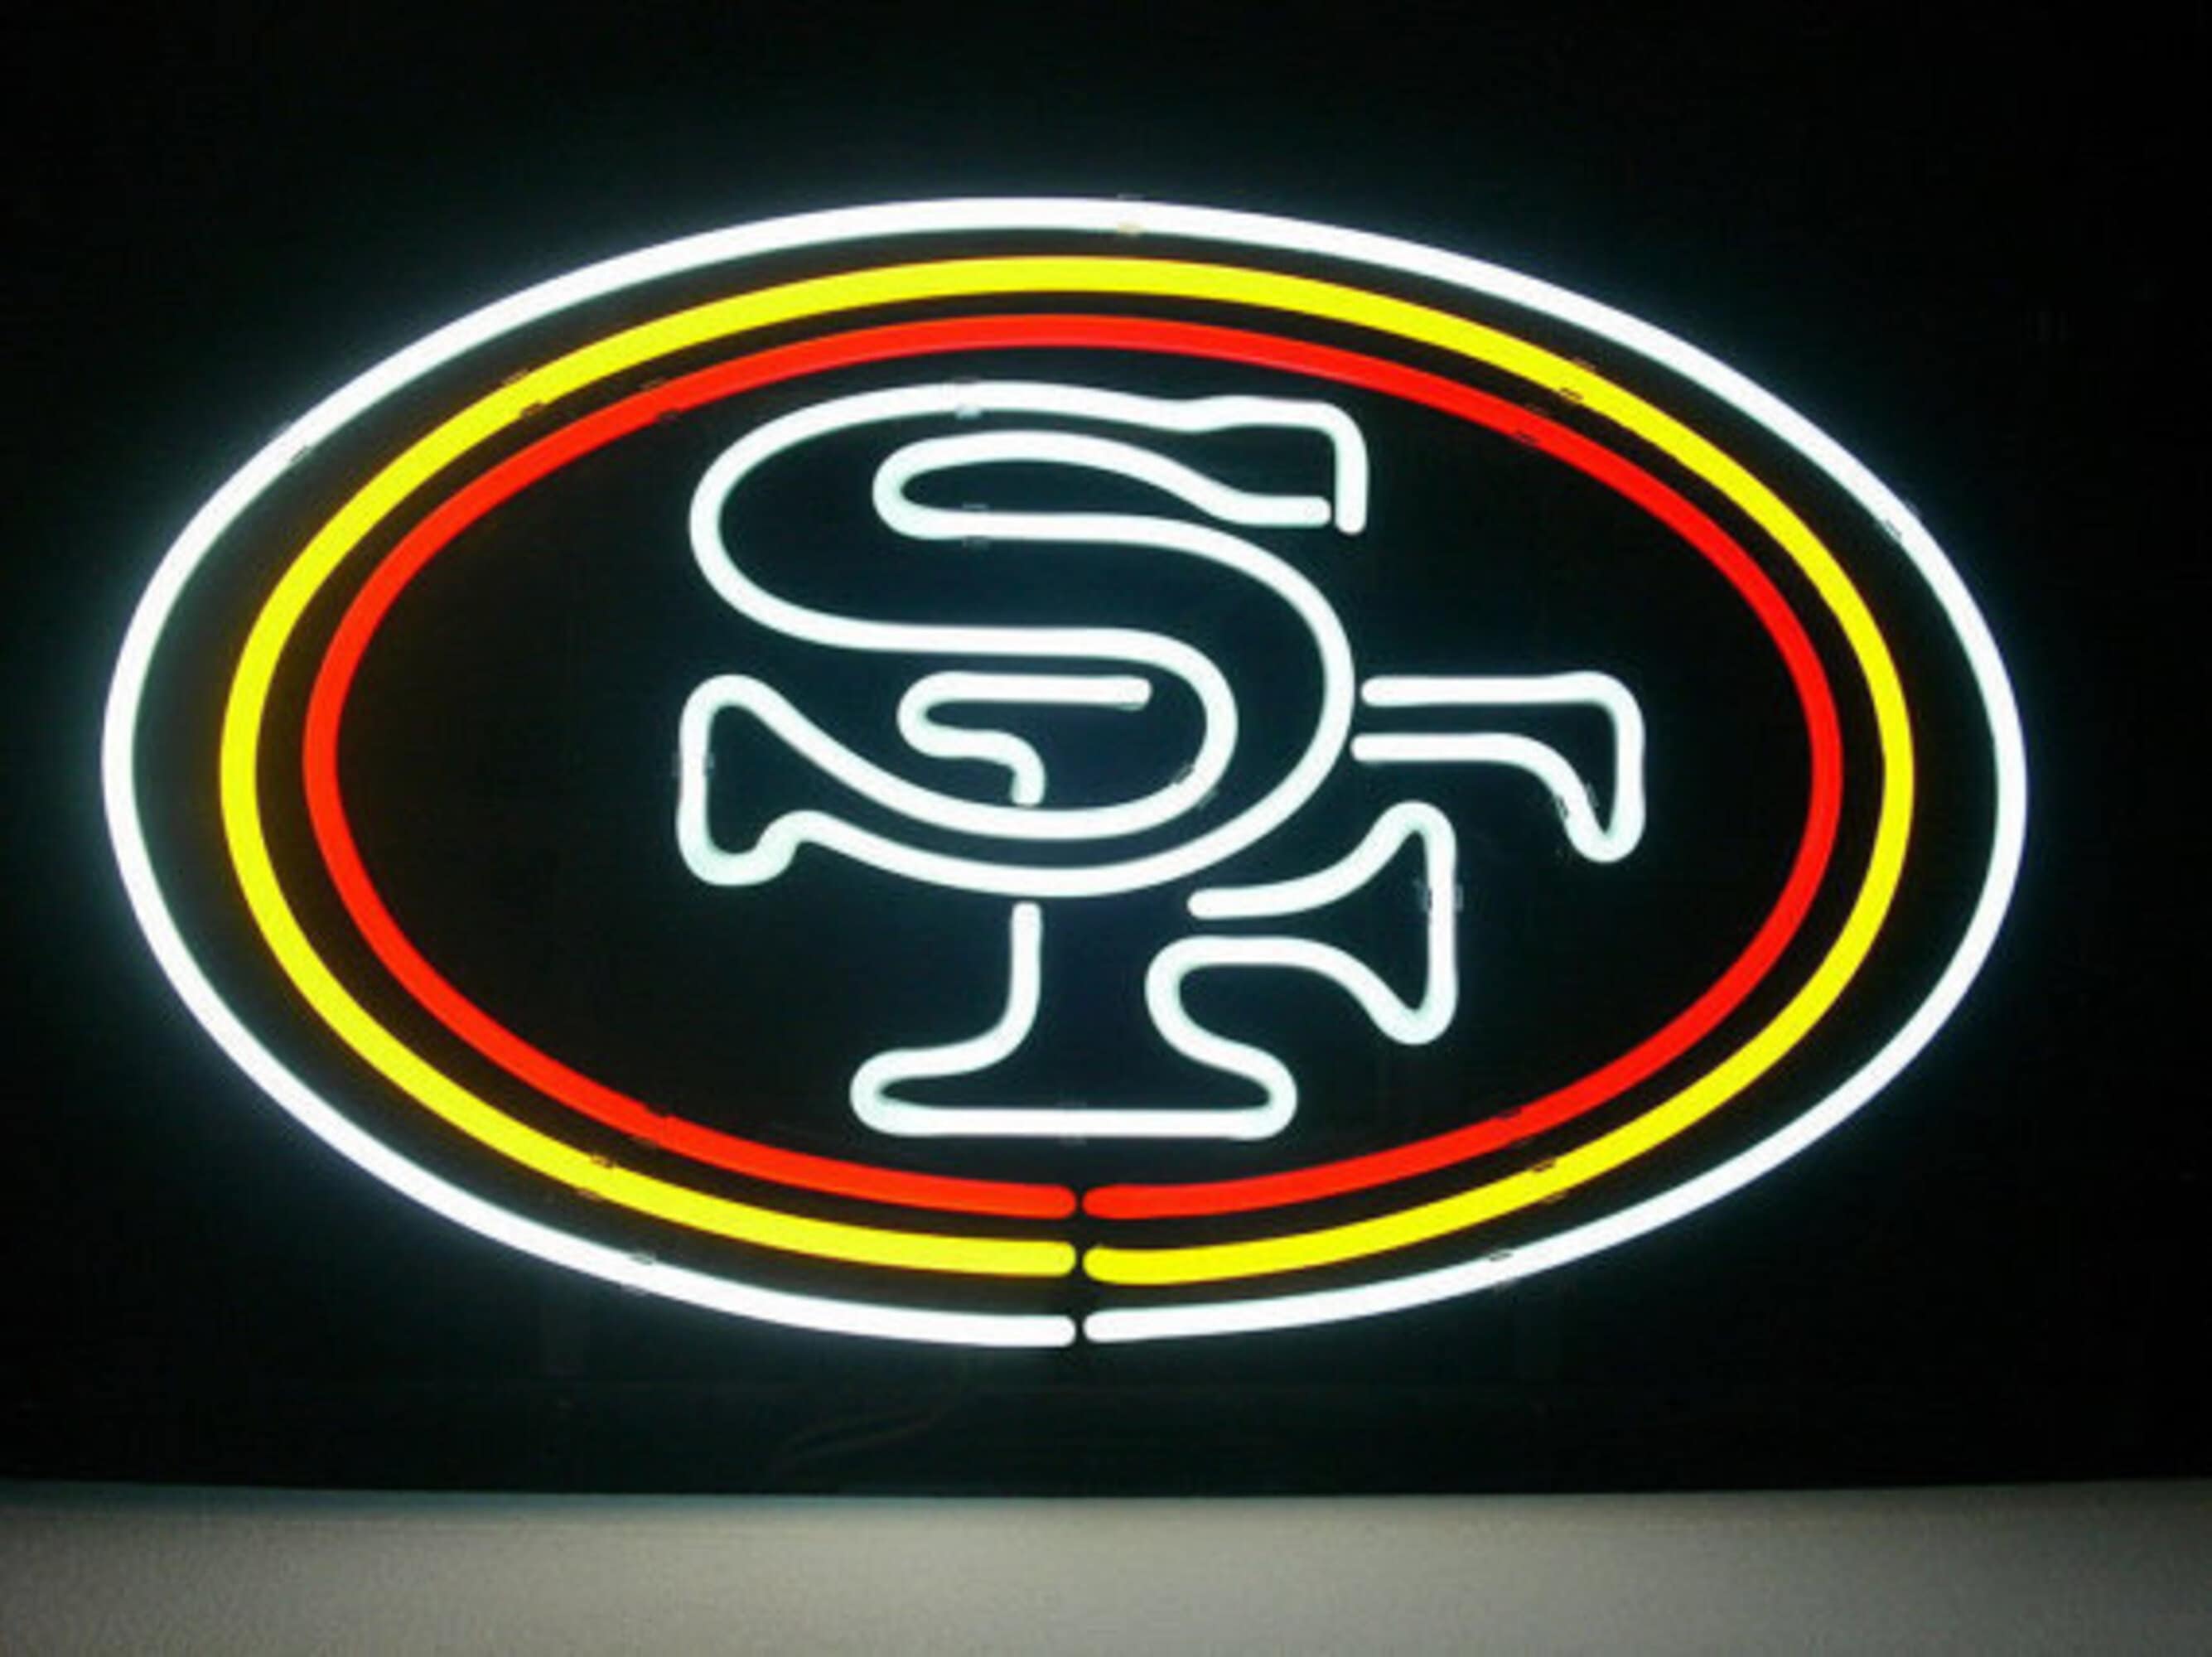 San Francisco 49ers 15 Round LED Lit Wall Sign